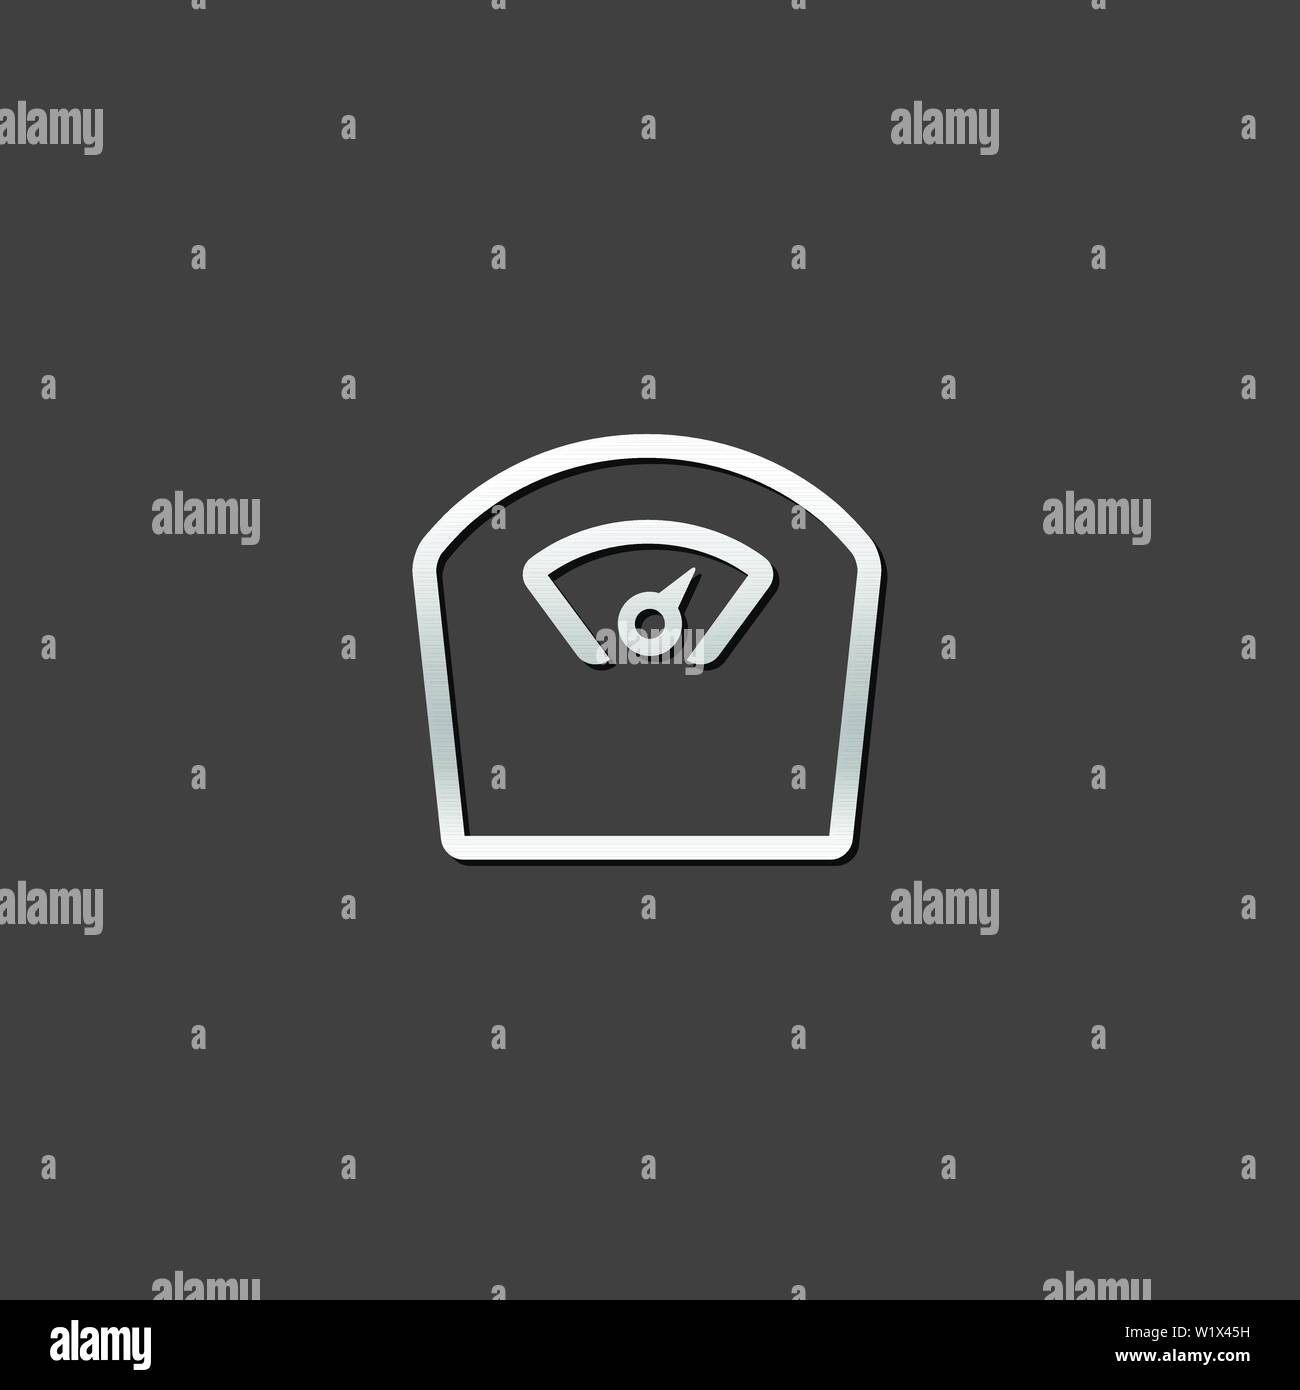 Weight fish scale not scales Black and White Stock Photos & Images - Alamy